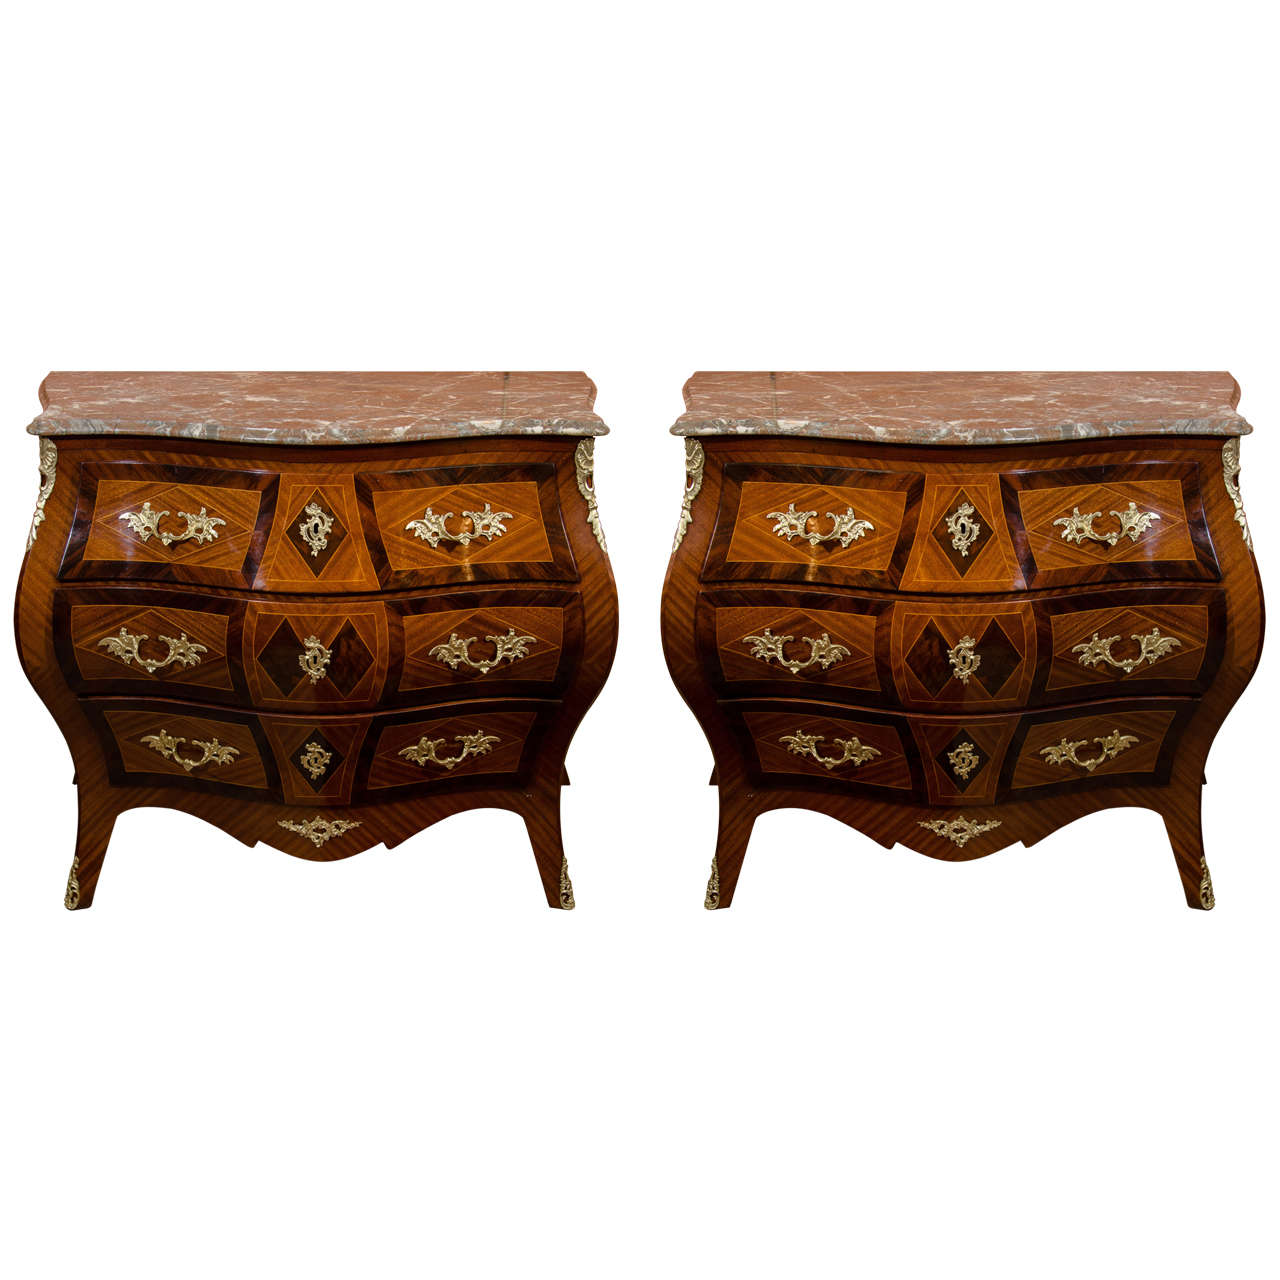 Pair of Swedish Marble-Top Commodes